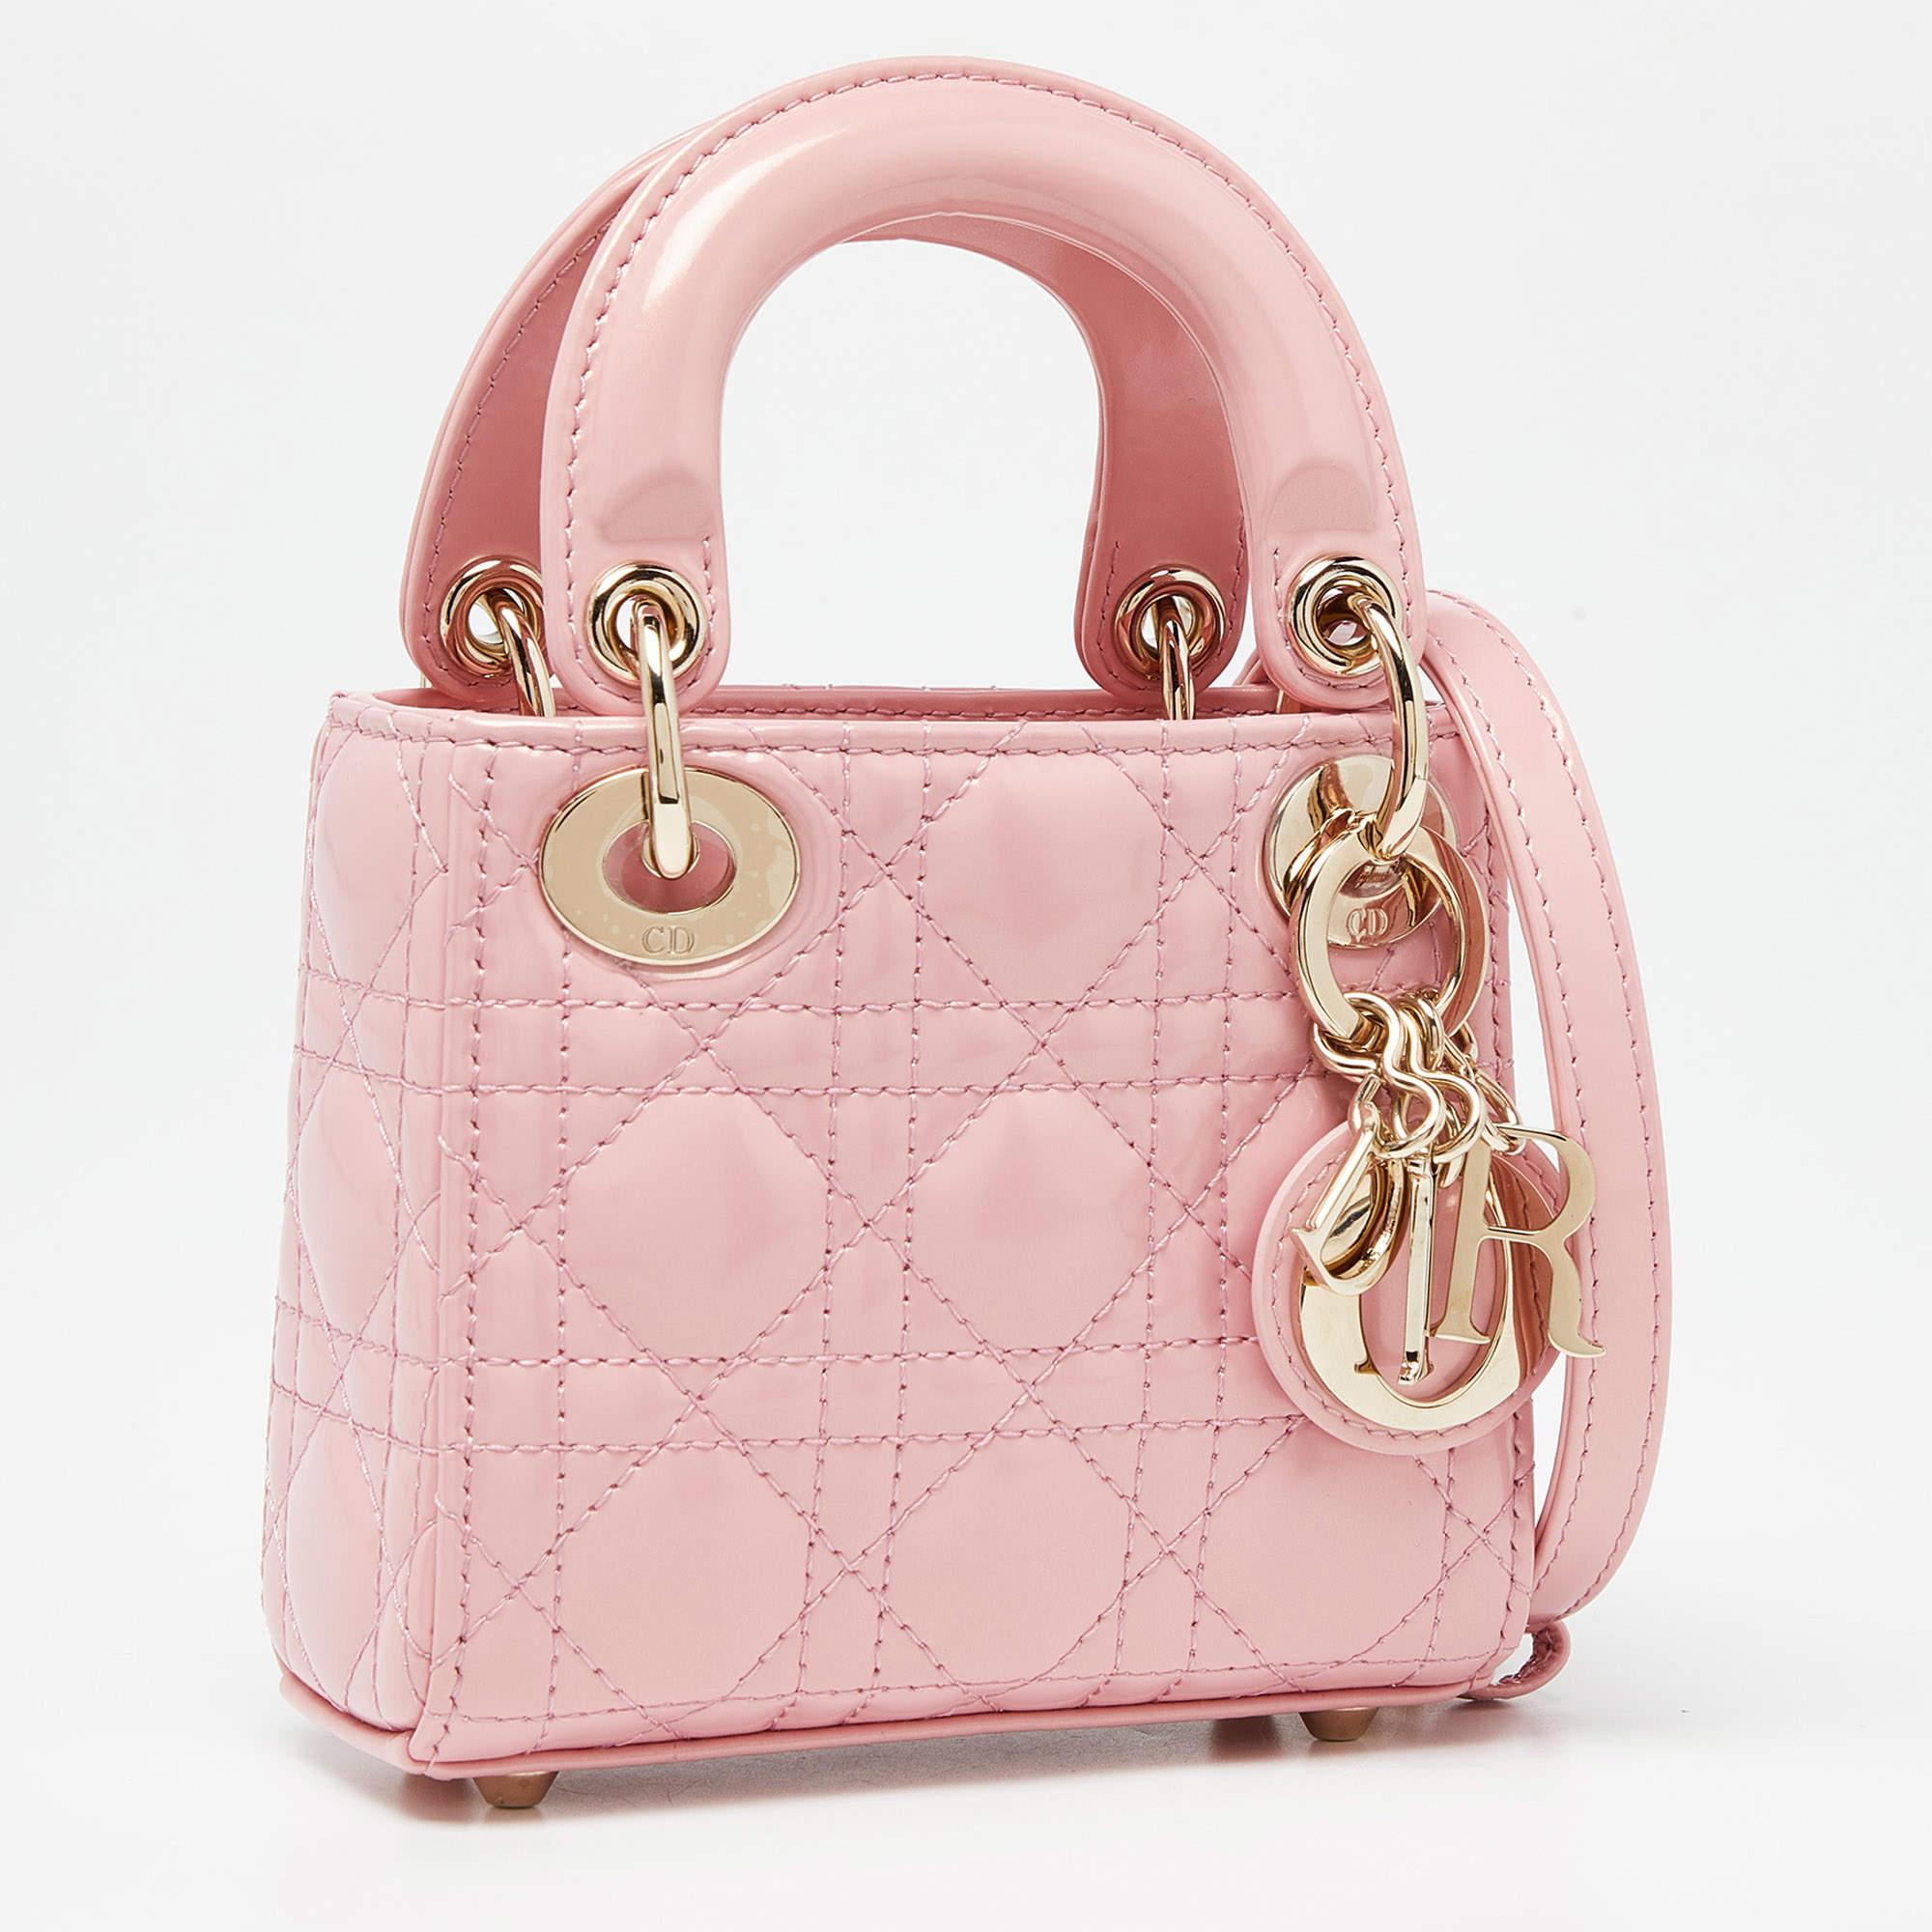 A timeless status and great design mark the Lady Dior tote. It is an iconic bag that people continue to invest in to this day. We have here this Micro Lady Dior in light pink. It's light, cute, and super pretty.

